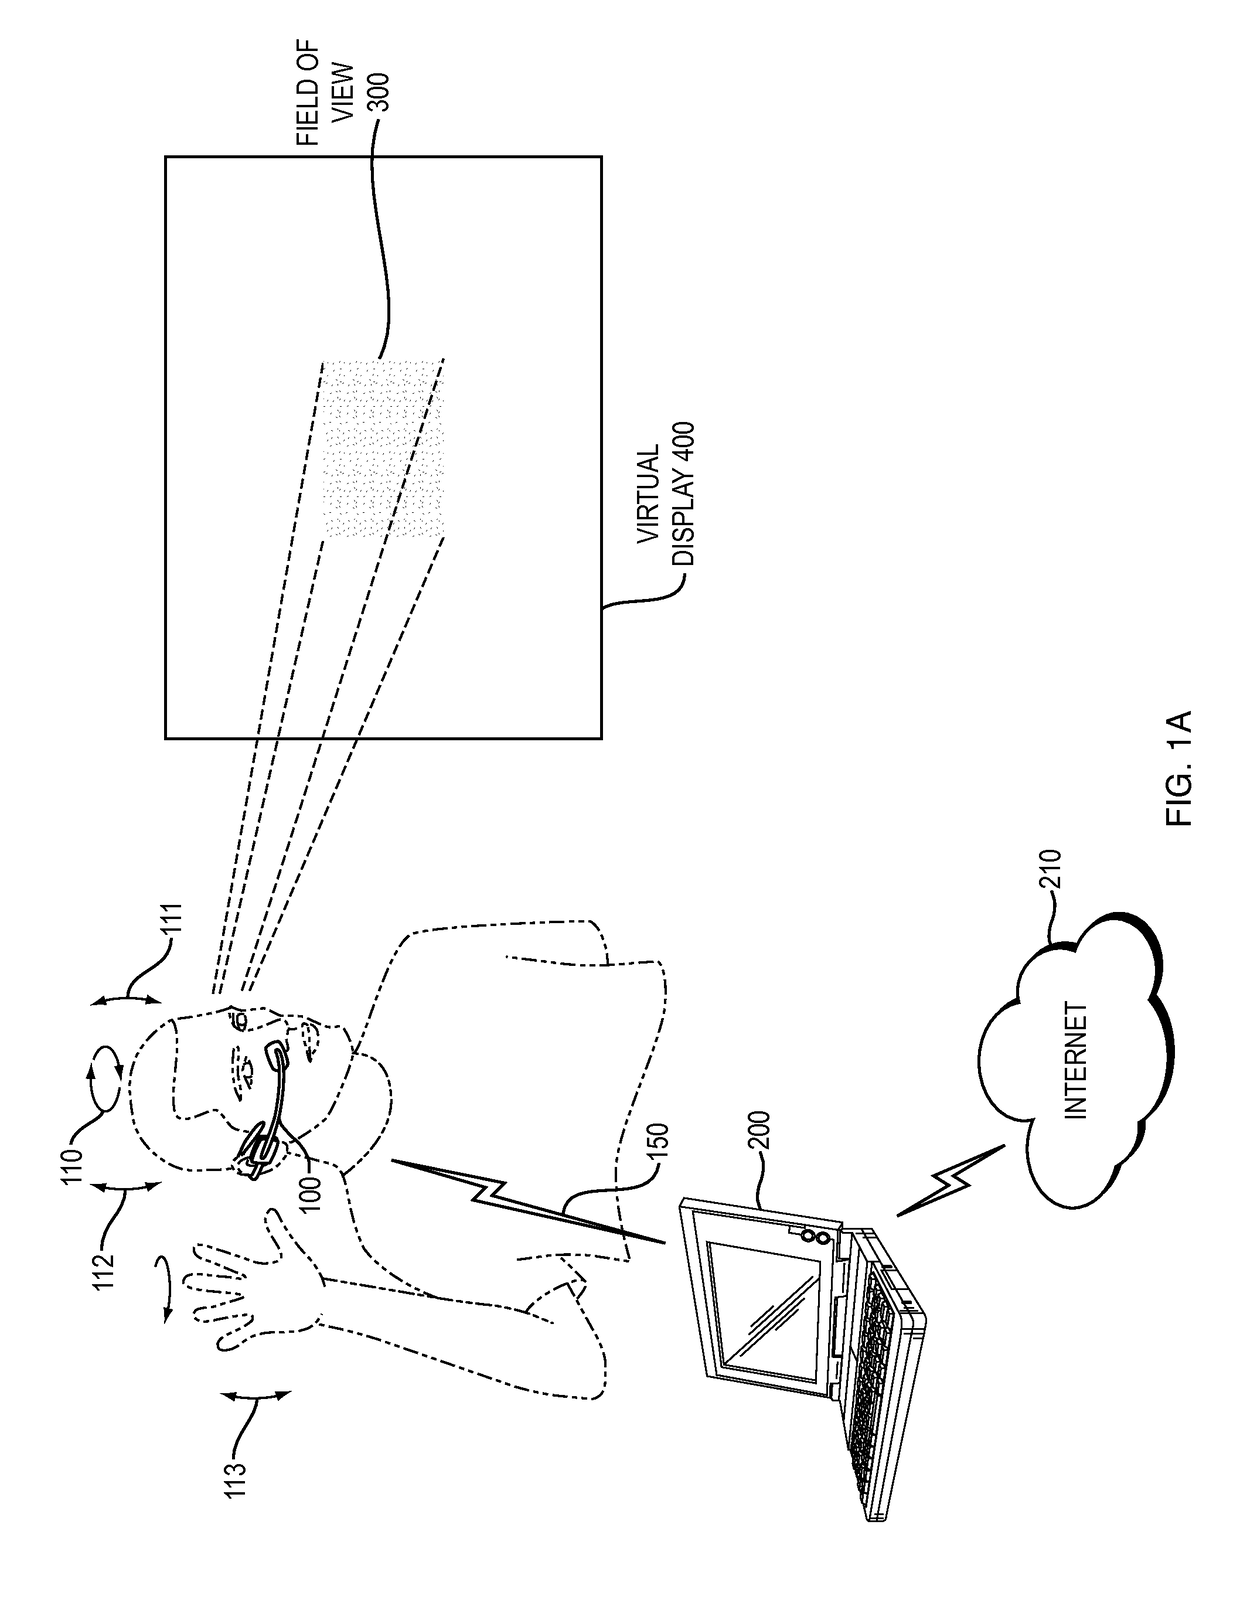 Digital voice processing method and system for headset computer